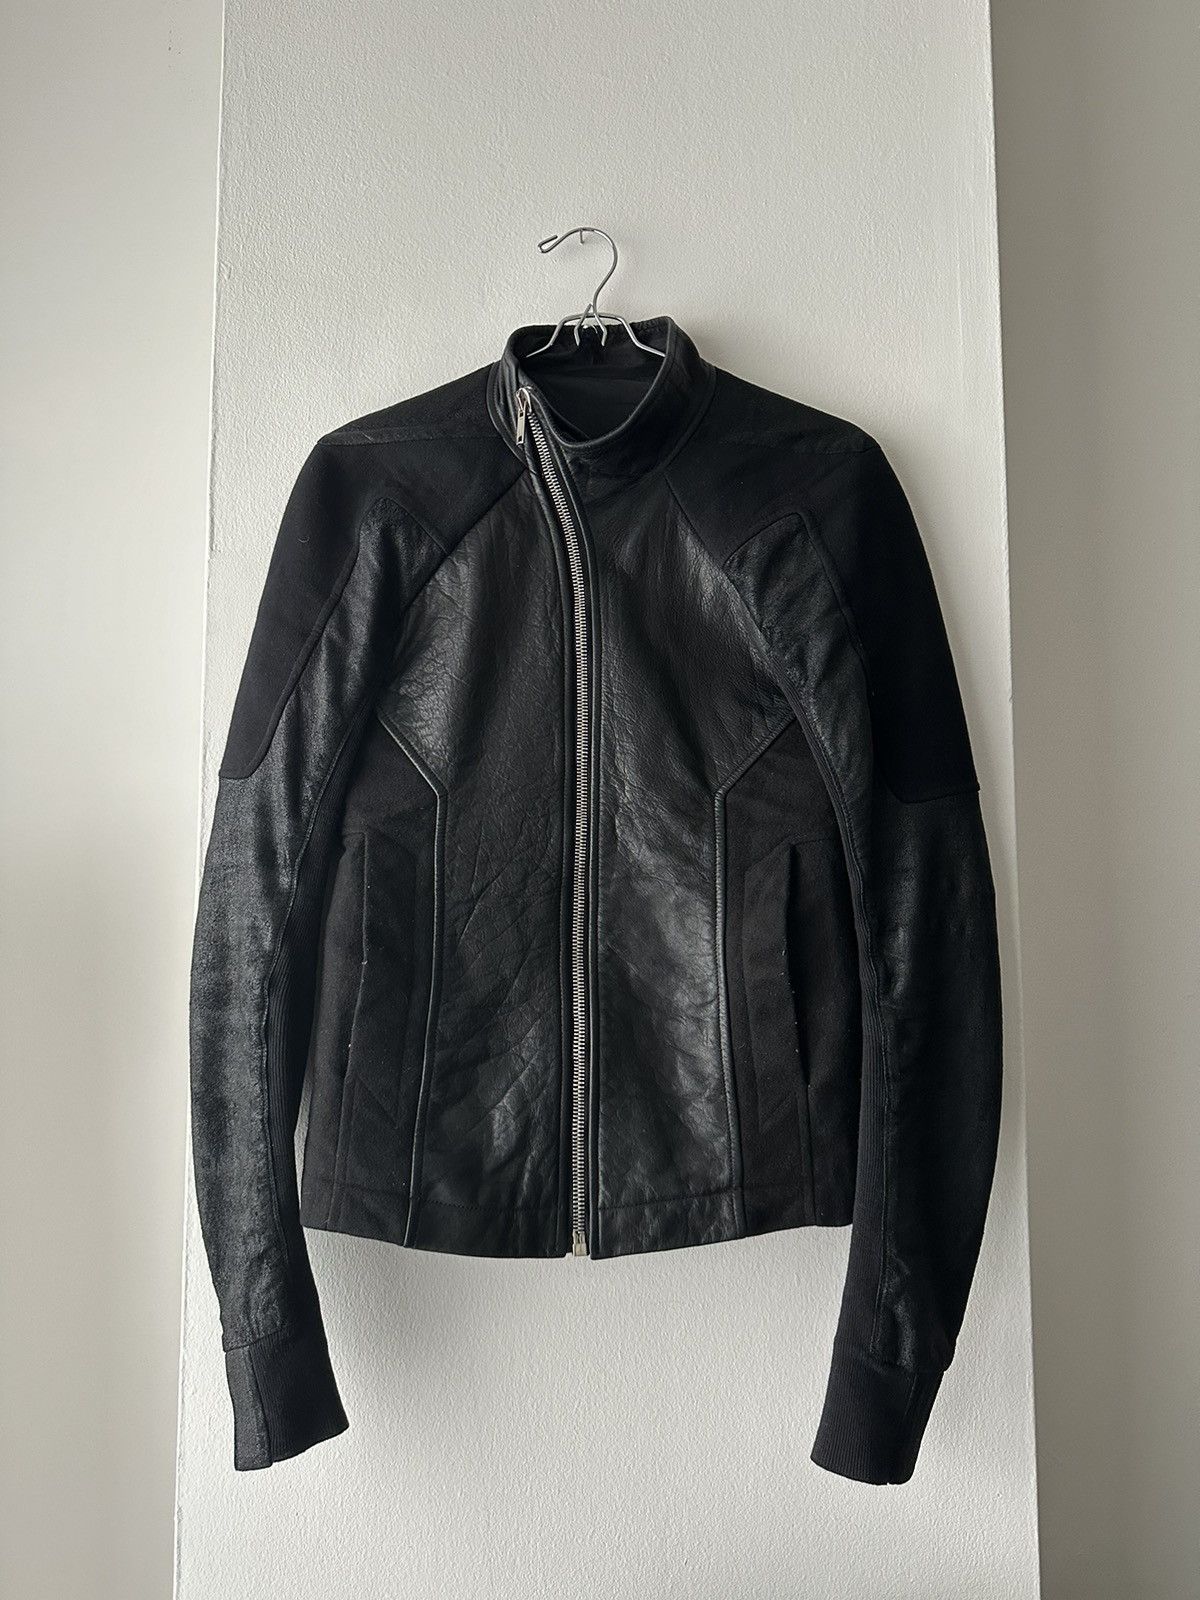 Rick Owens FW11 Limo Combo Leather Jacket | Grailed